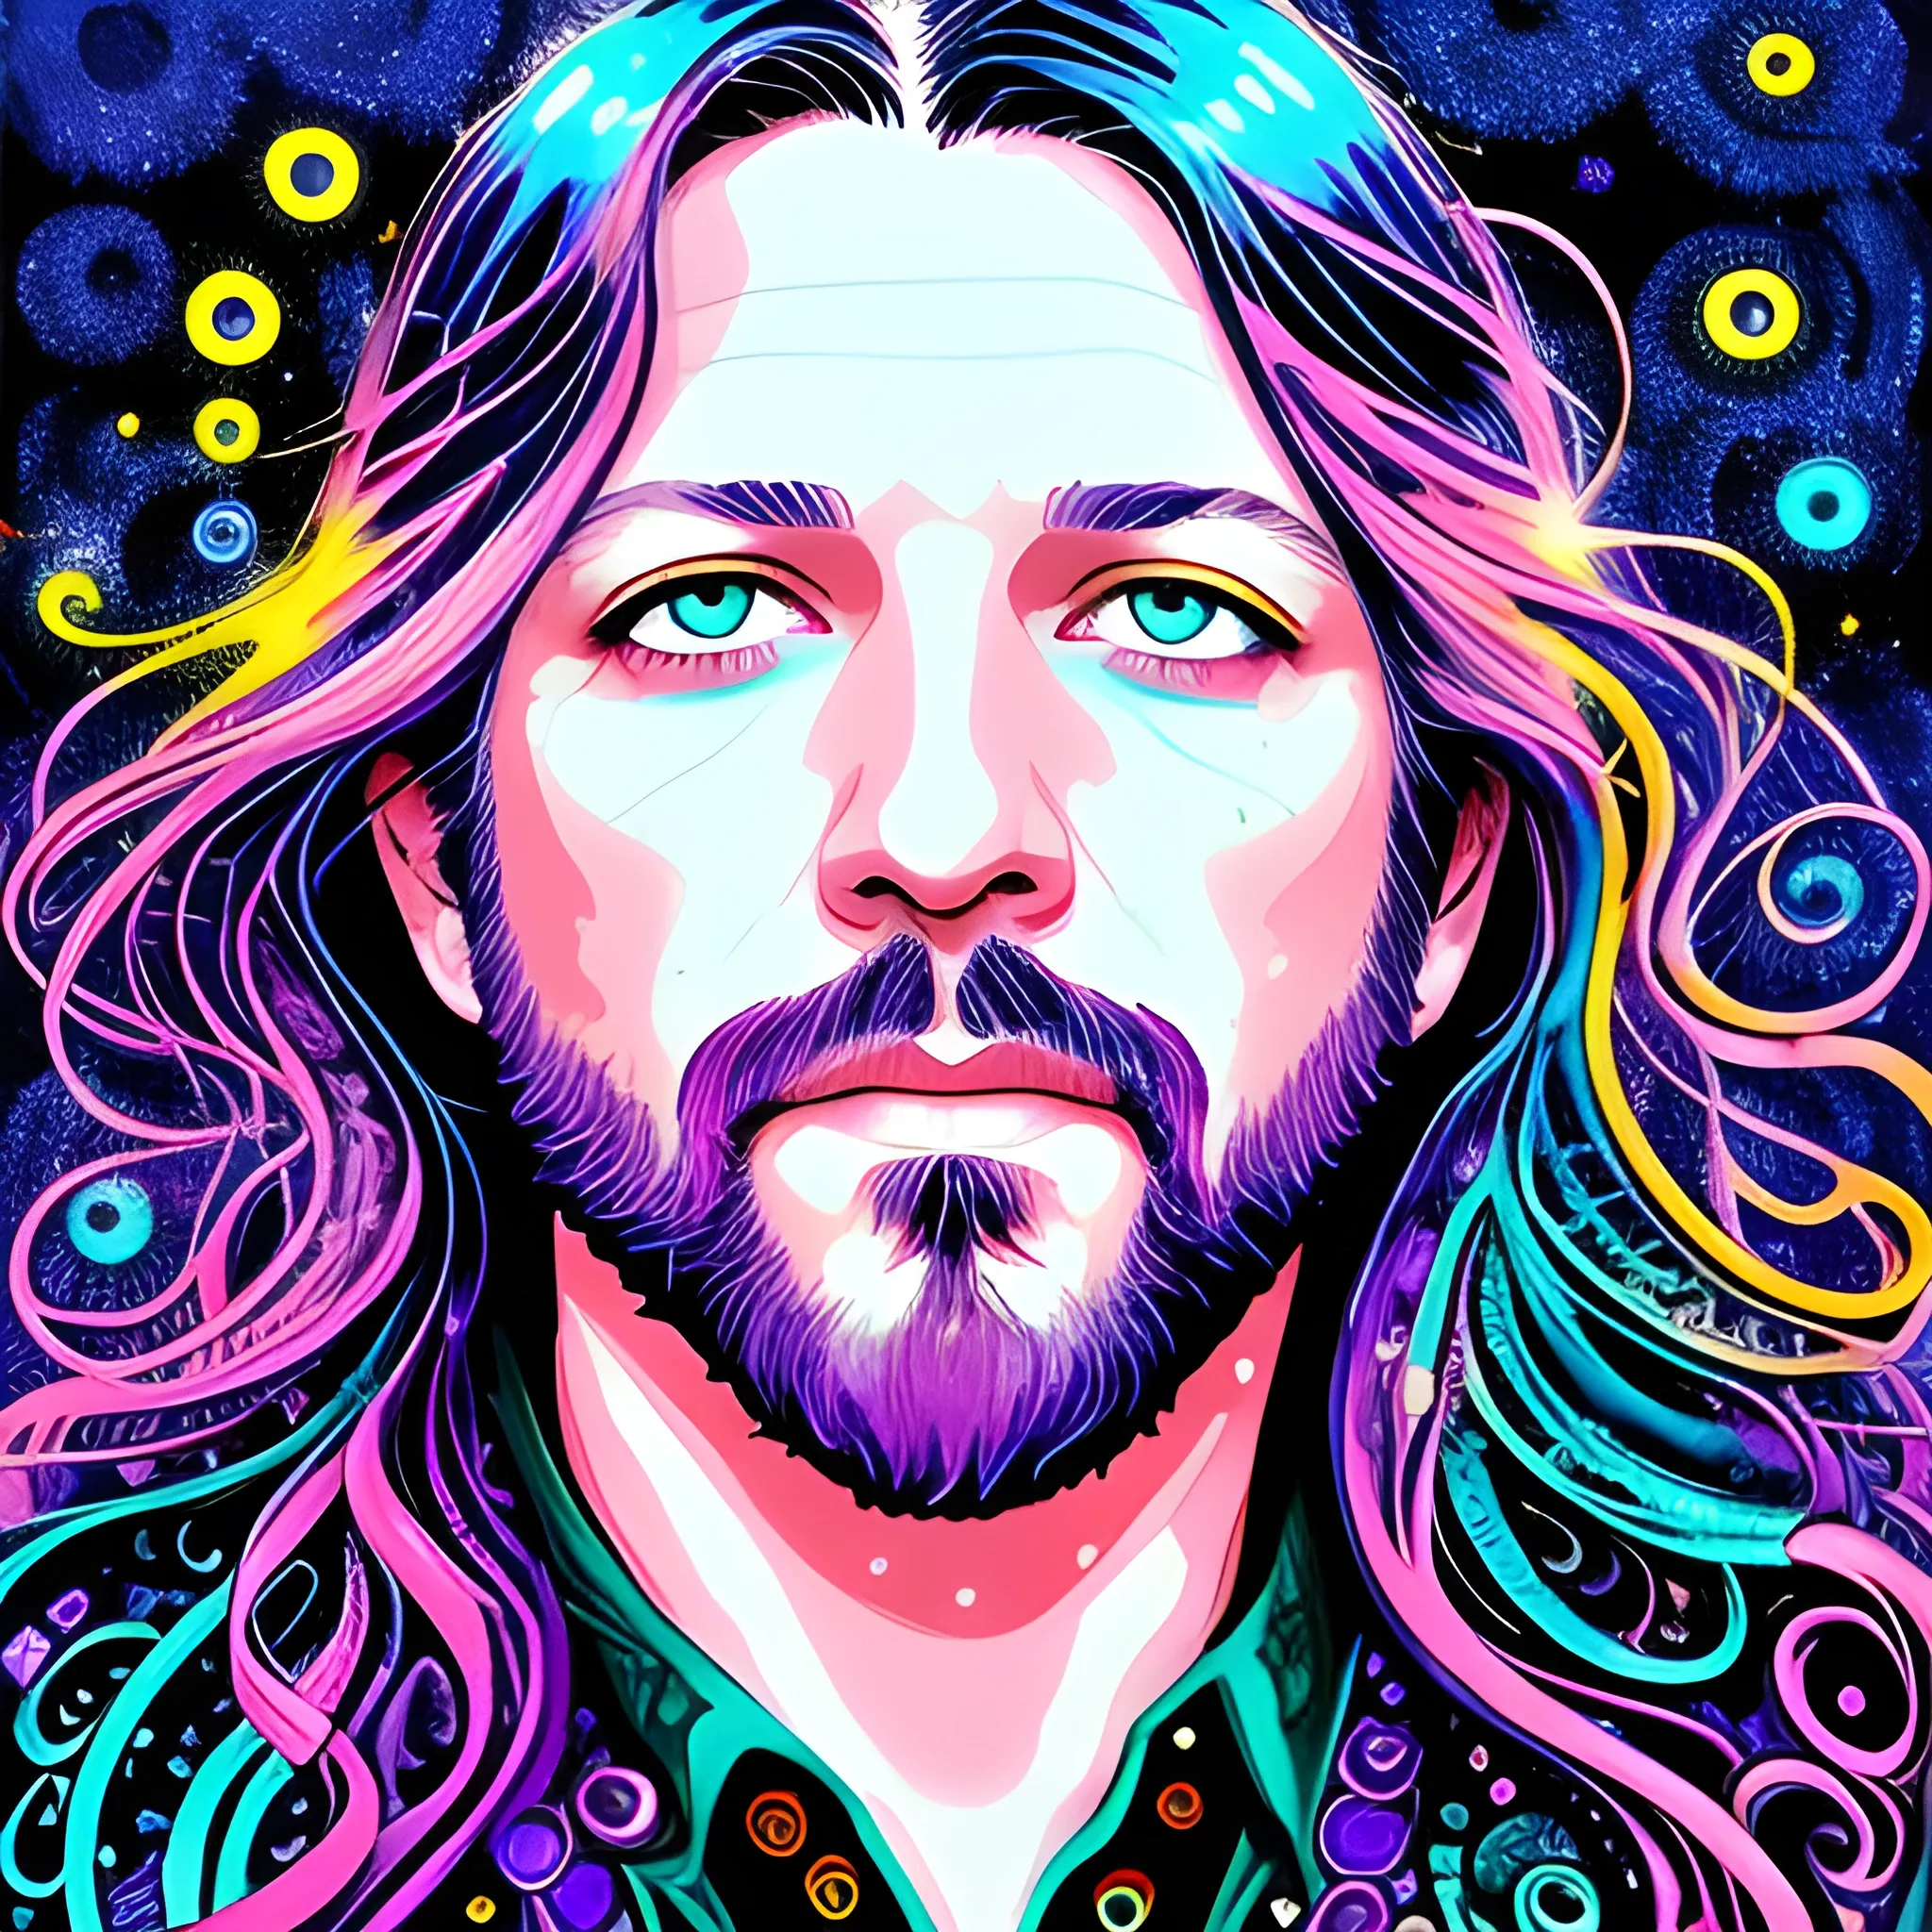 mixed media ink illustration Rich Robinson of The Black Crowes, meticulously detailed face, Rich Robinson, long hair, blue eyes, luminous colorful sparkles, by James R. Eads, Gawki, rajewel, DestinyBlue, Tania Rivilis, Dan Mumford, glitter, airbrush, pink, purple, teal, green, multi-hued